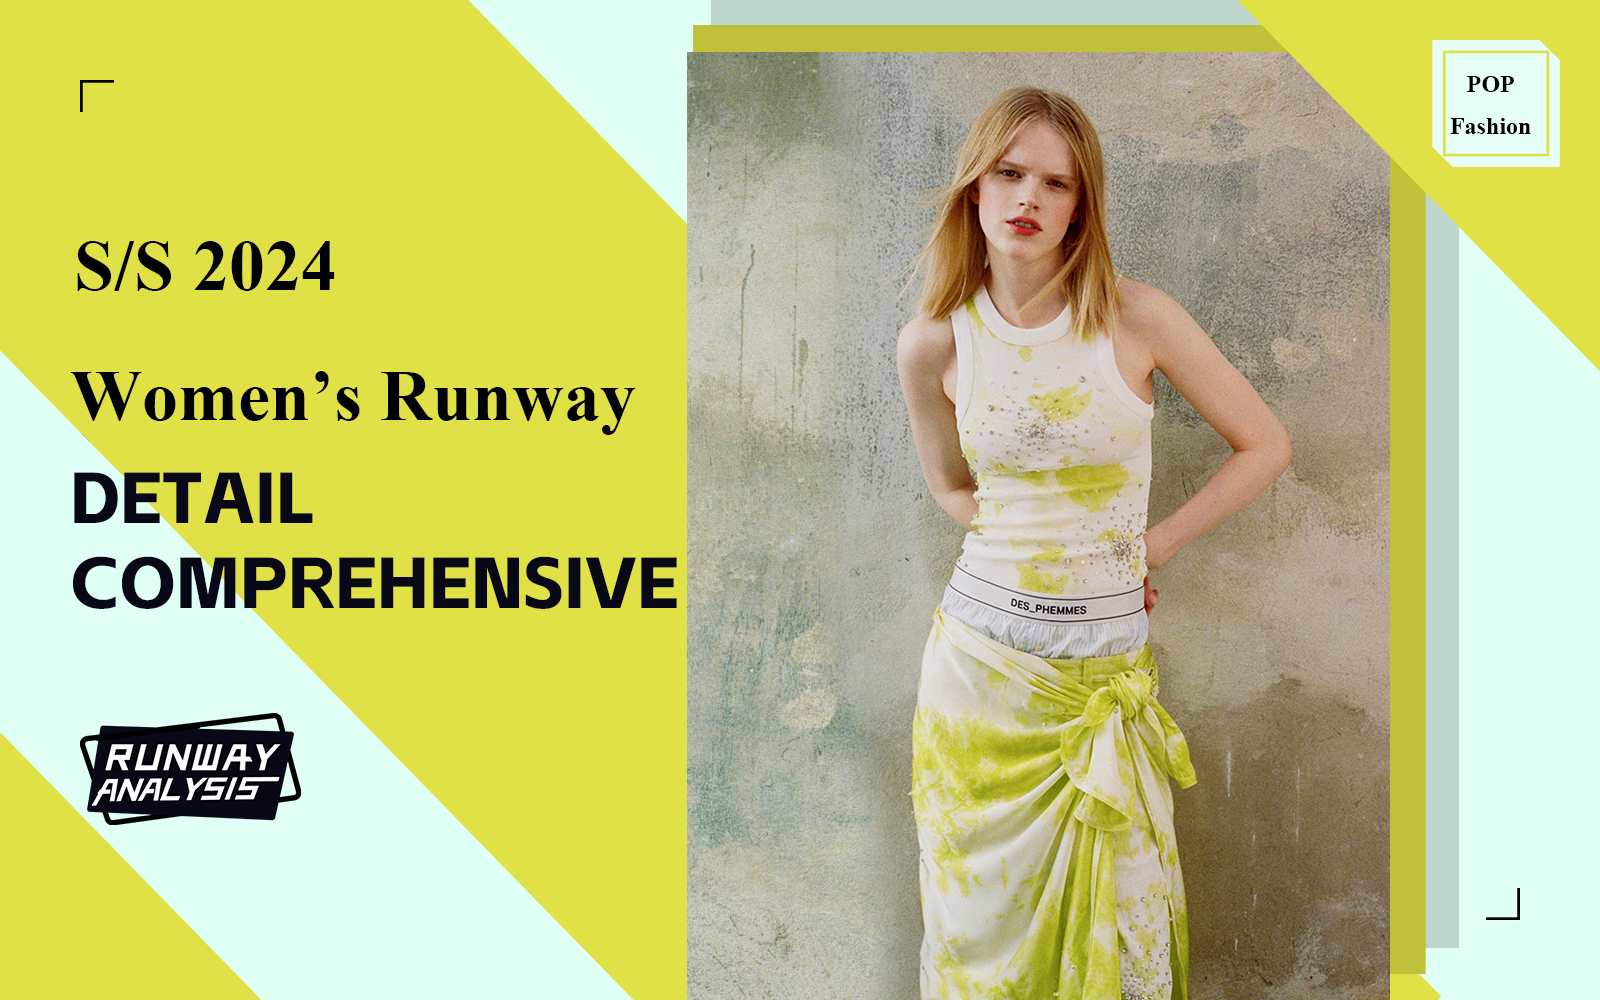 Details -- S/S 2025 Comprehensive Analysis of Women's Ready-to-wear Runway